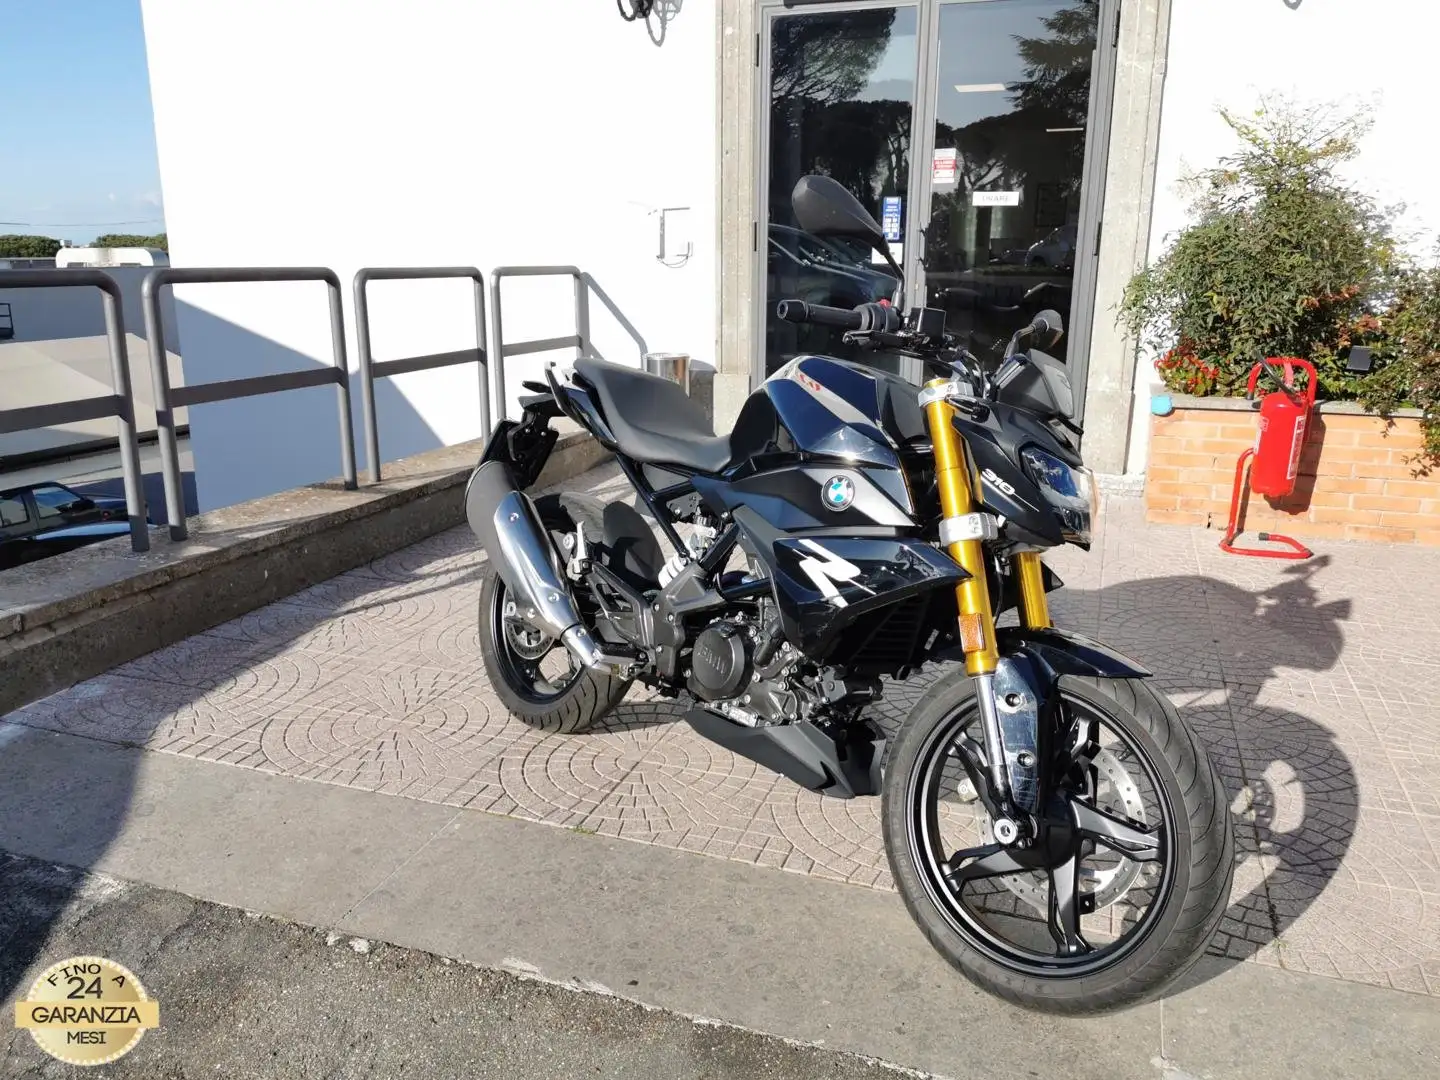 BMW G 310 R * Pat.A2 - NEOPAT - E5 * - RATE AUTO MOTO SCOOTER Negro - 2